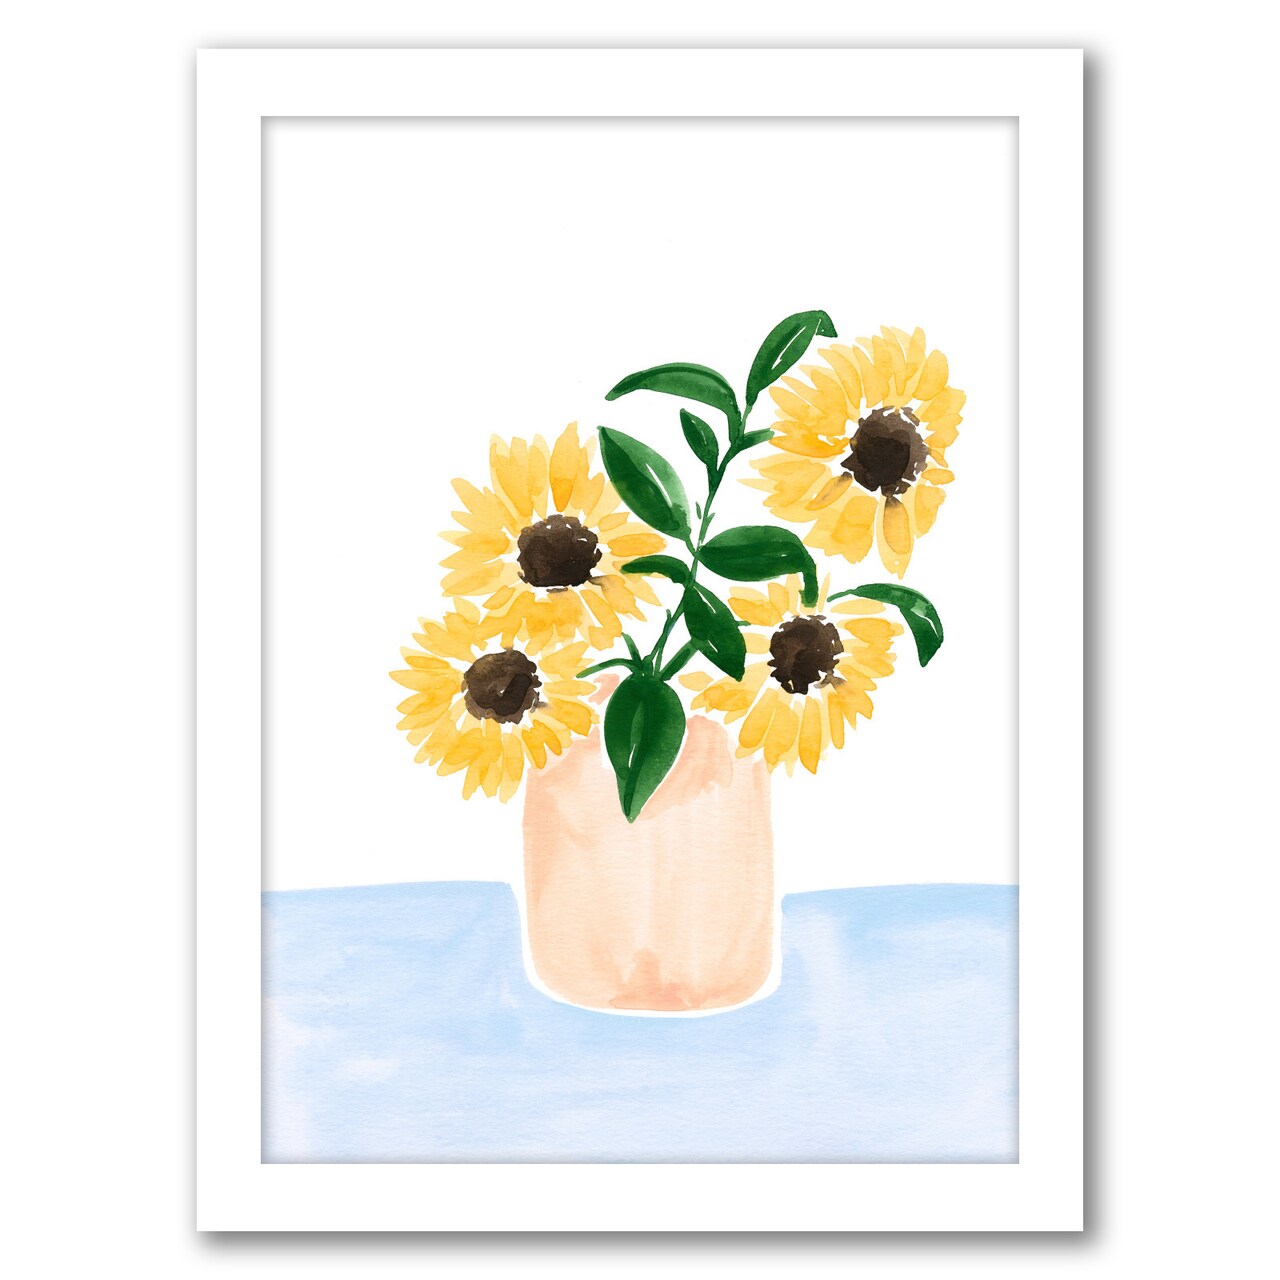 Sunflowers In A Vase by Sabina Fenn Frame  - Americanflat